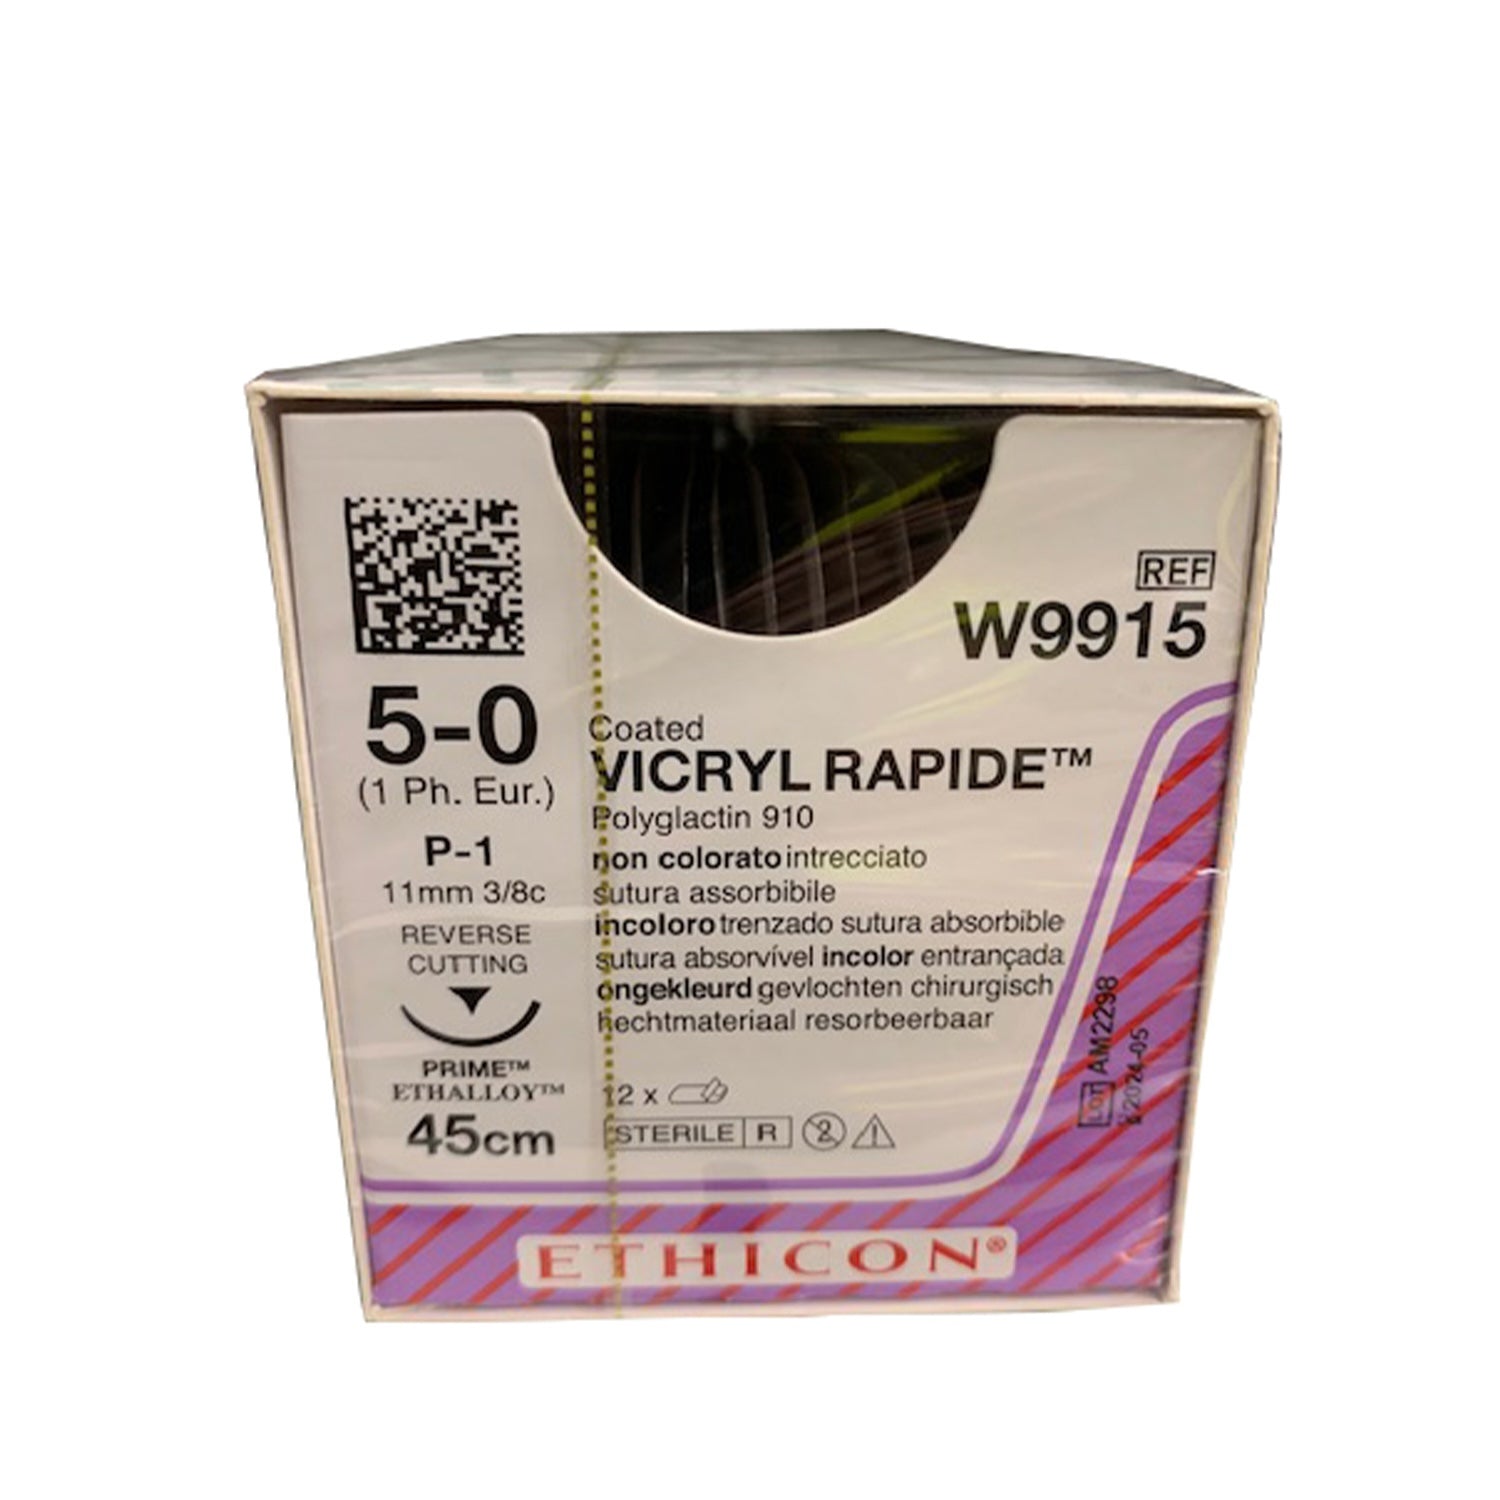 Ethicon Vicryl Rapide Suture | Absorbable | Undyed | Size: 5-0 | Length: 45cm | Needle: P-1 | Pack of 12 (1)